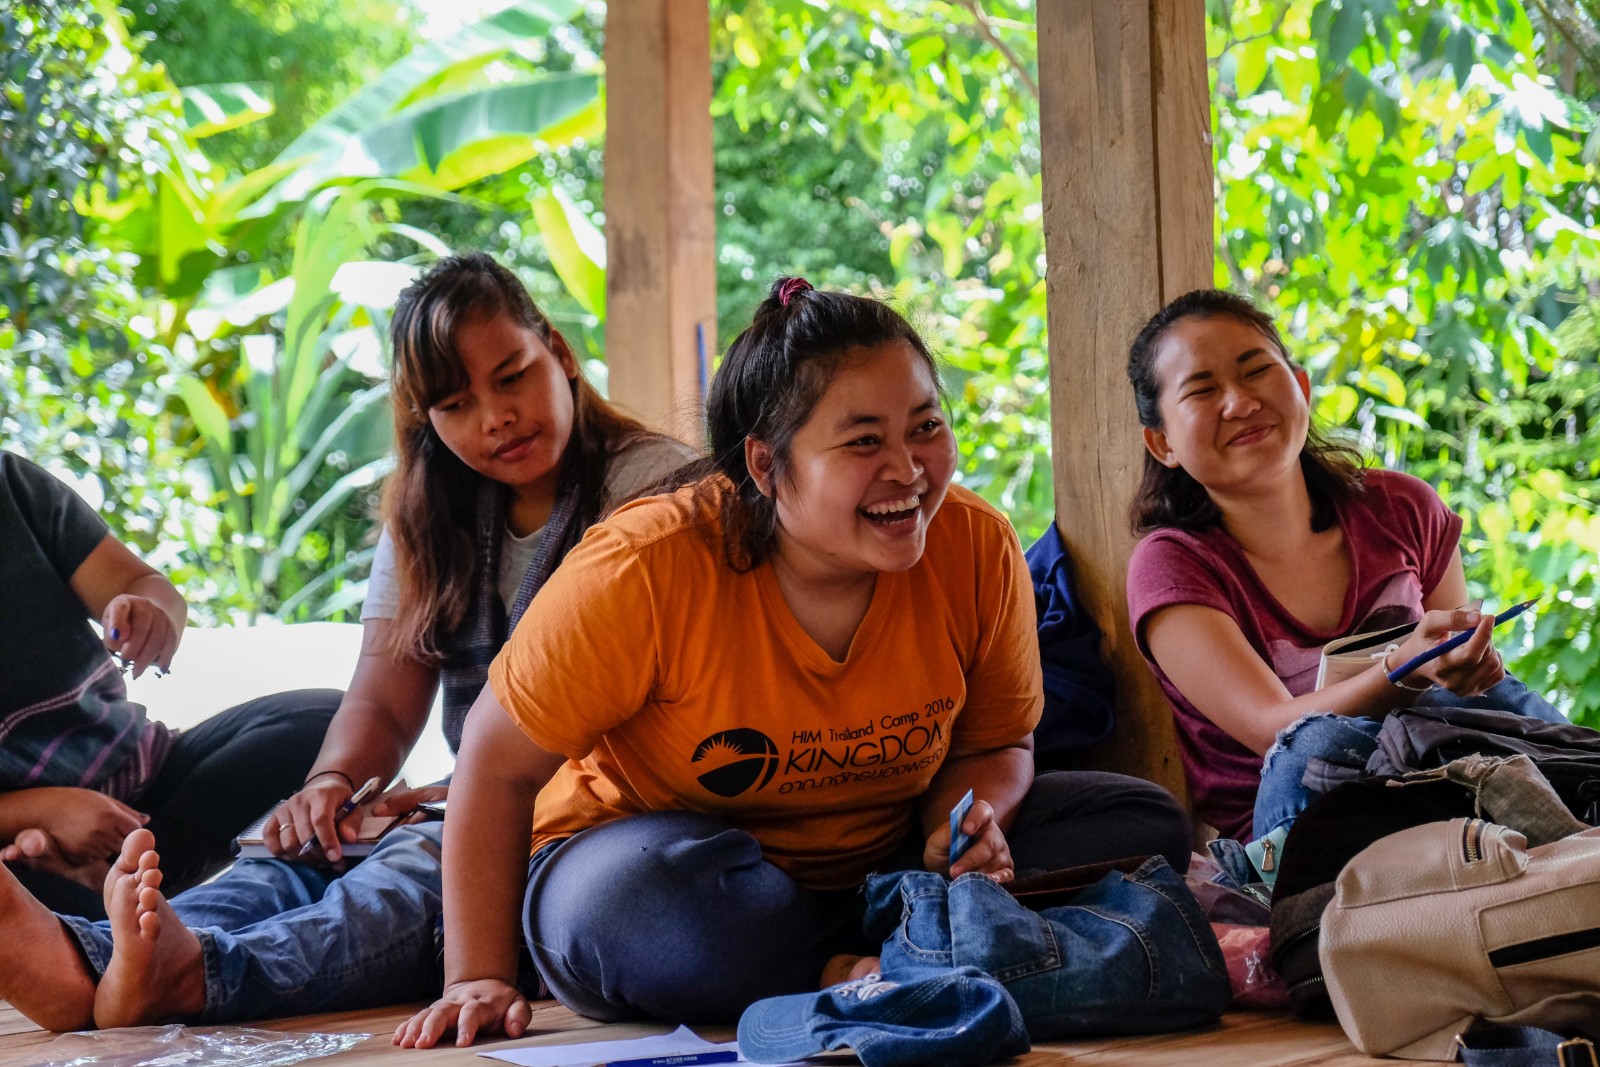 EarthRights School students shared their own advocacy experiences with the activists in Ban Nong Tao. Som, pictured here, also comes from an Karen community and has experienced similar challenges, including advocating for the rights of rural indigenous communities with subsistence lifestyles.